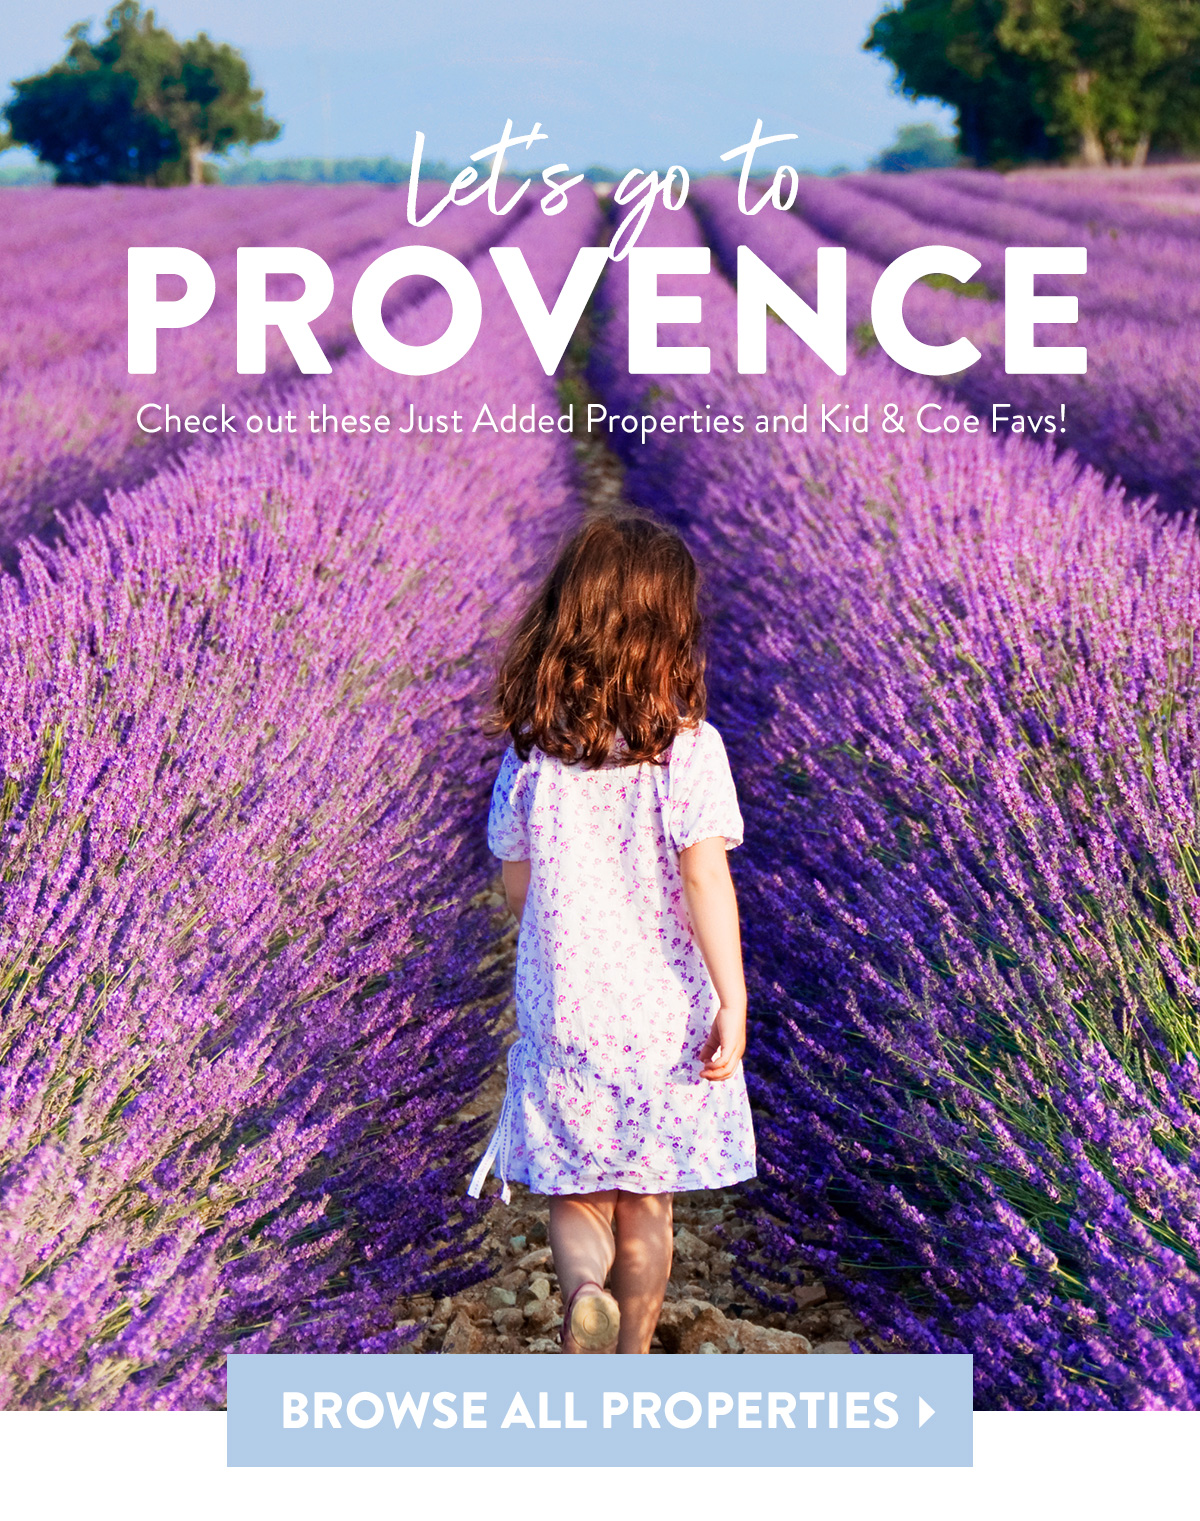 Let's Go To Provence